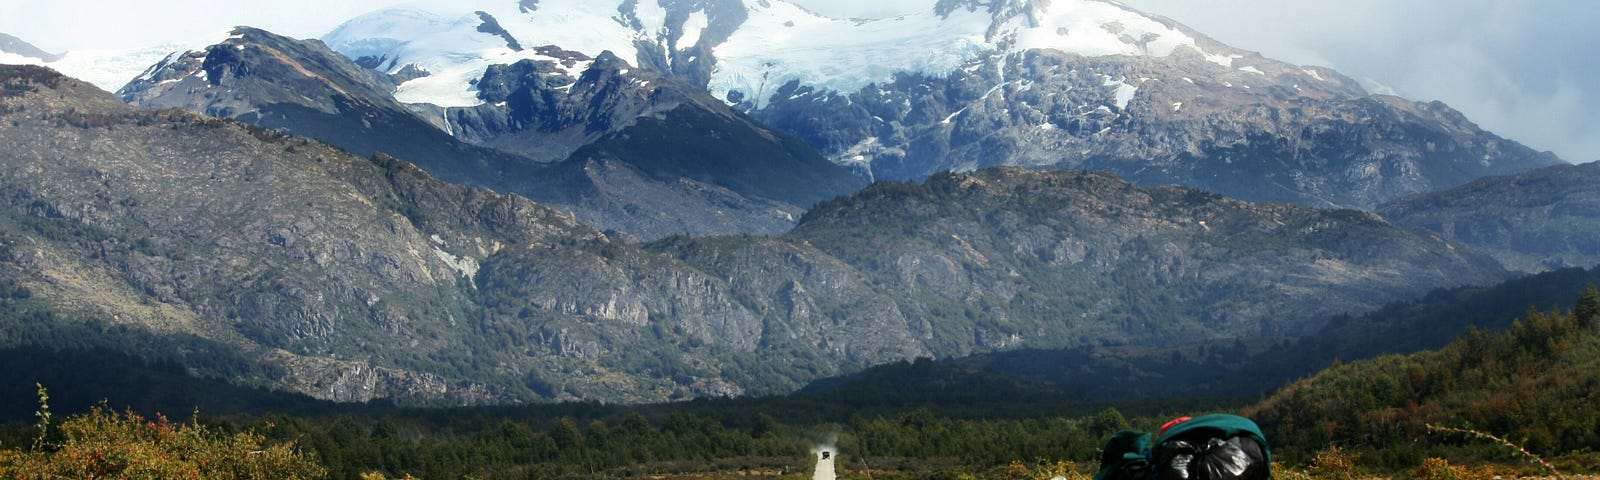 A landscape showing a gravel road through shrubland, with a snow-capped mountain on the horizon. A bike loaded with traveling gear is in the foreground, though the rider is nowhere to be seen.